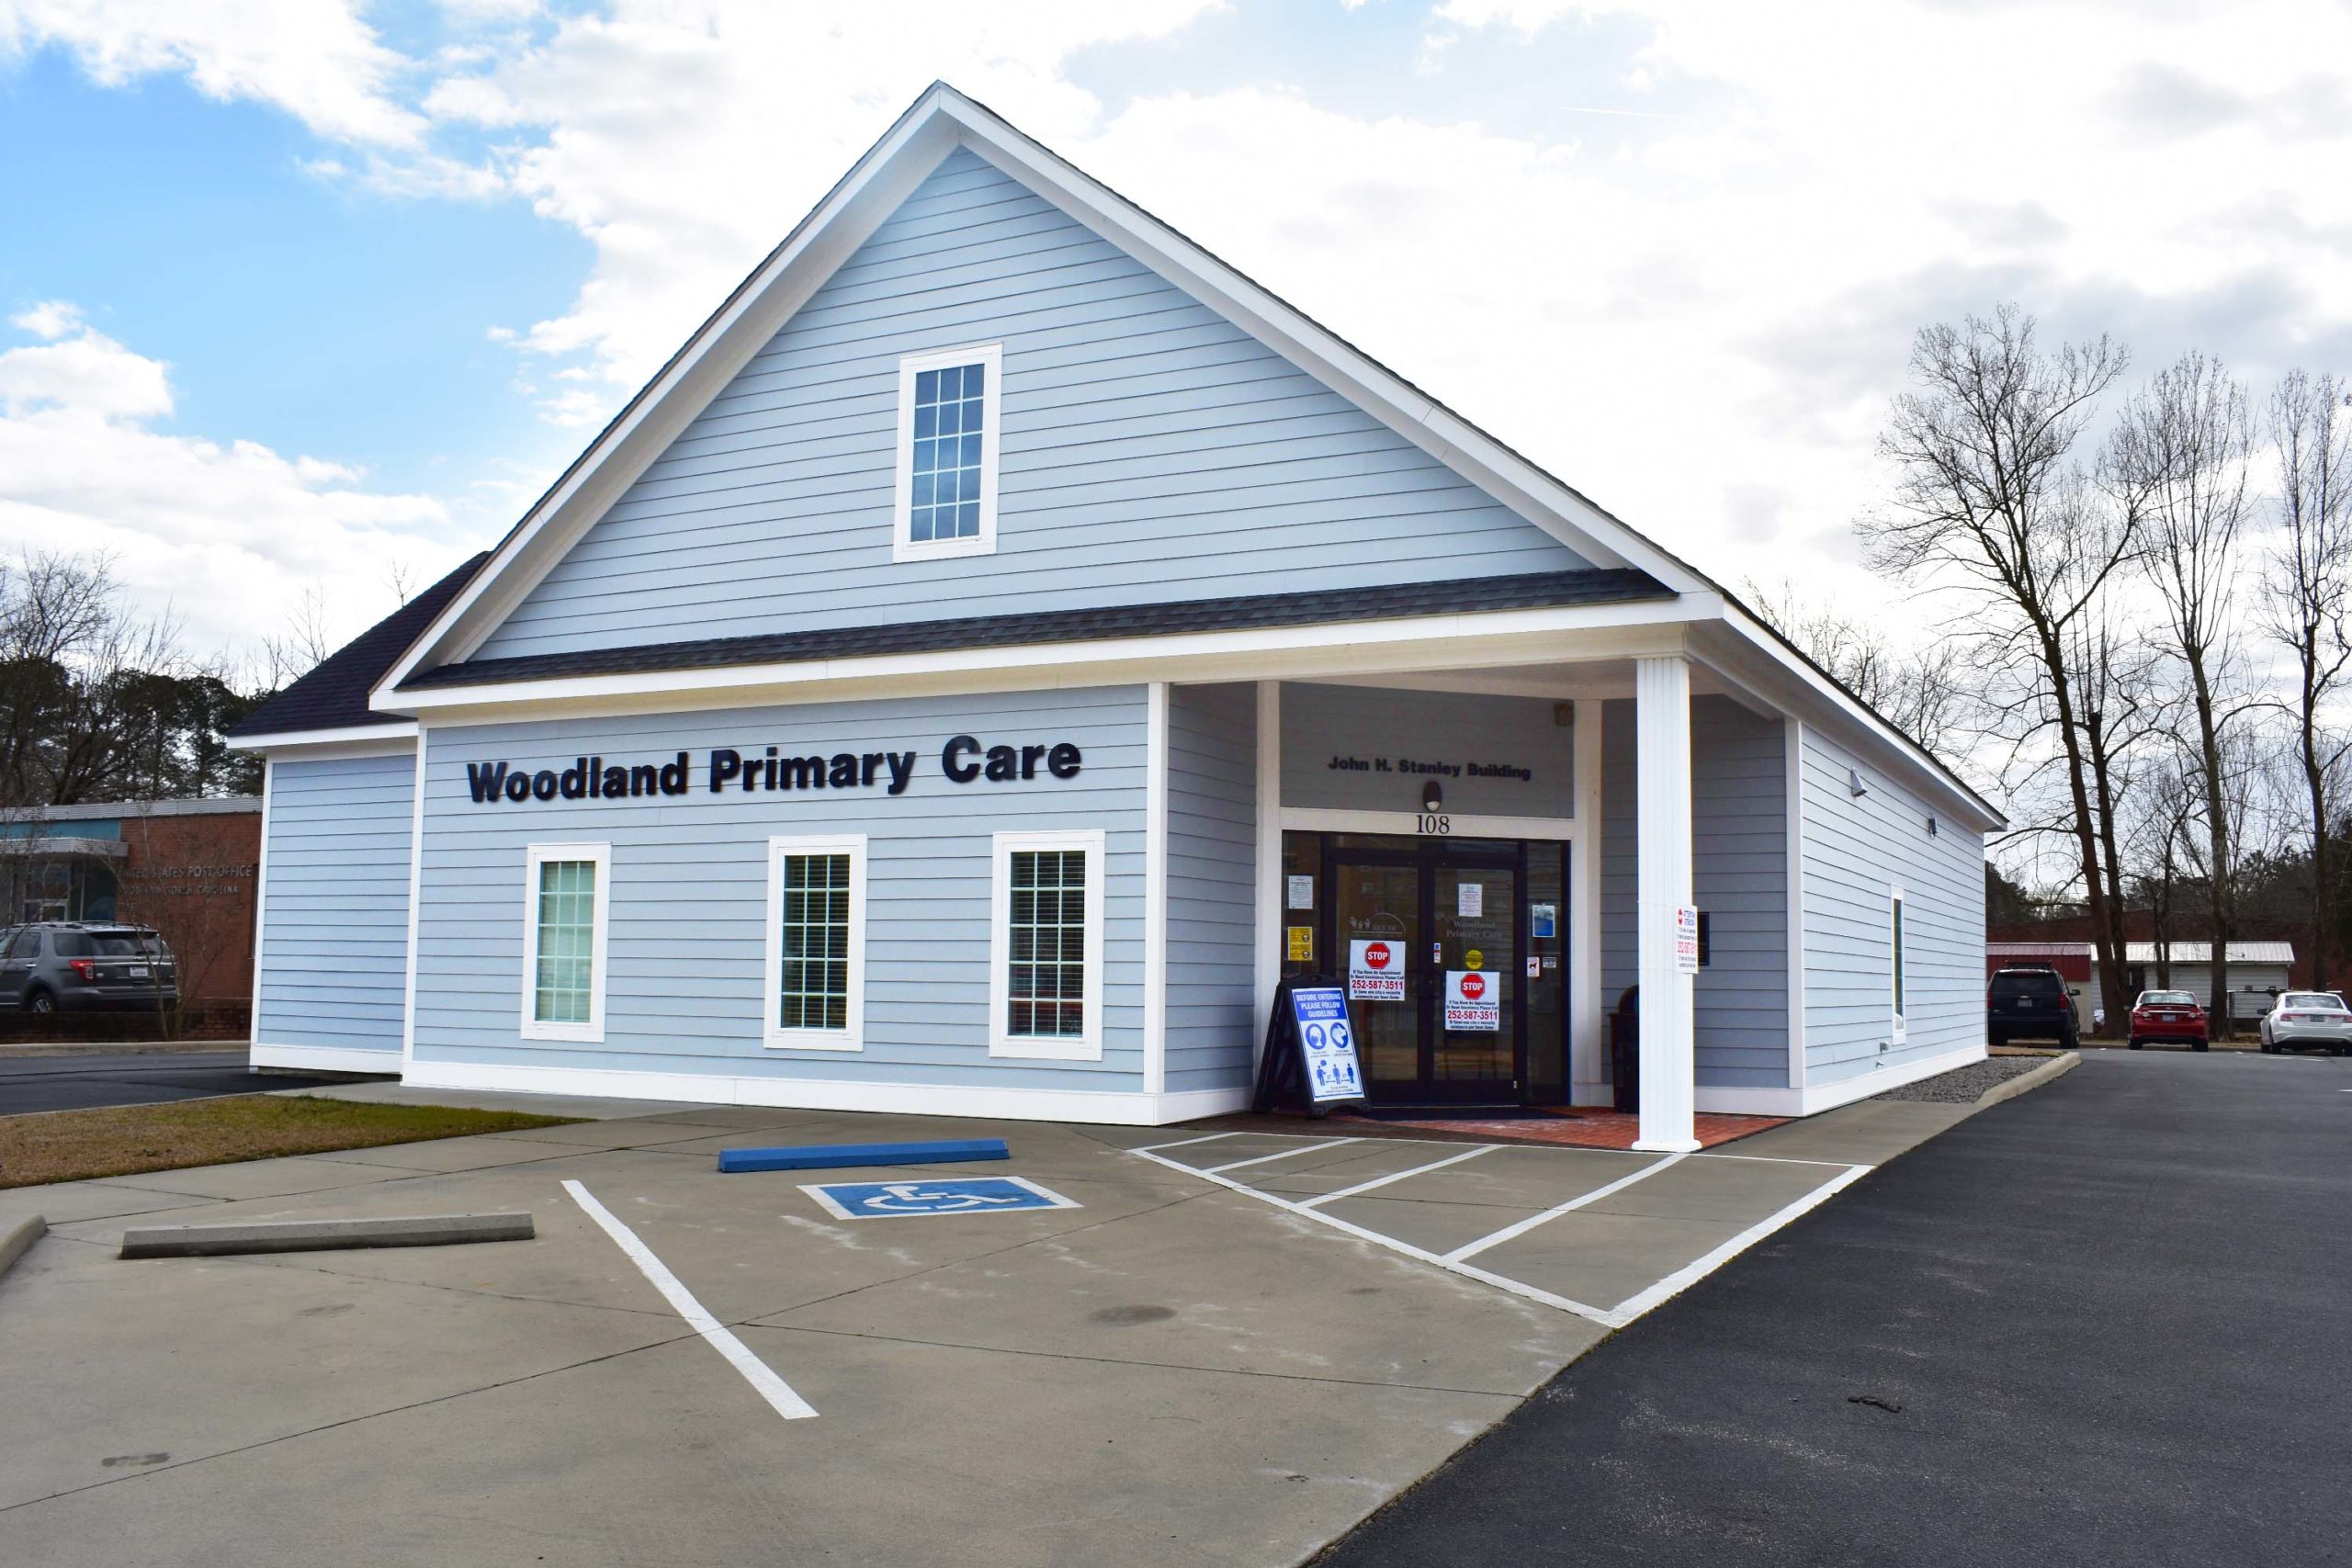 Woodland Primary Care grows during pandemic